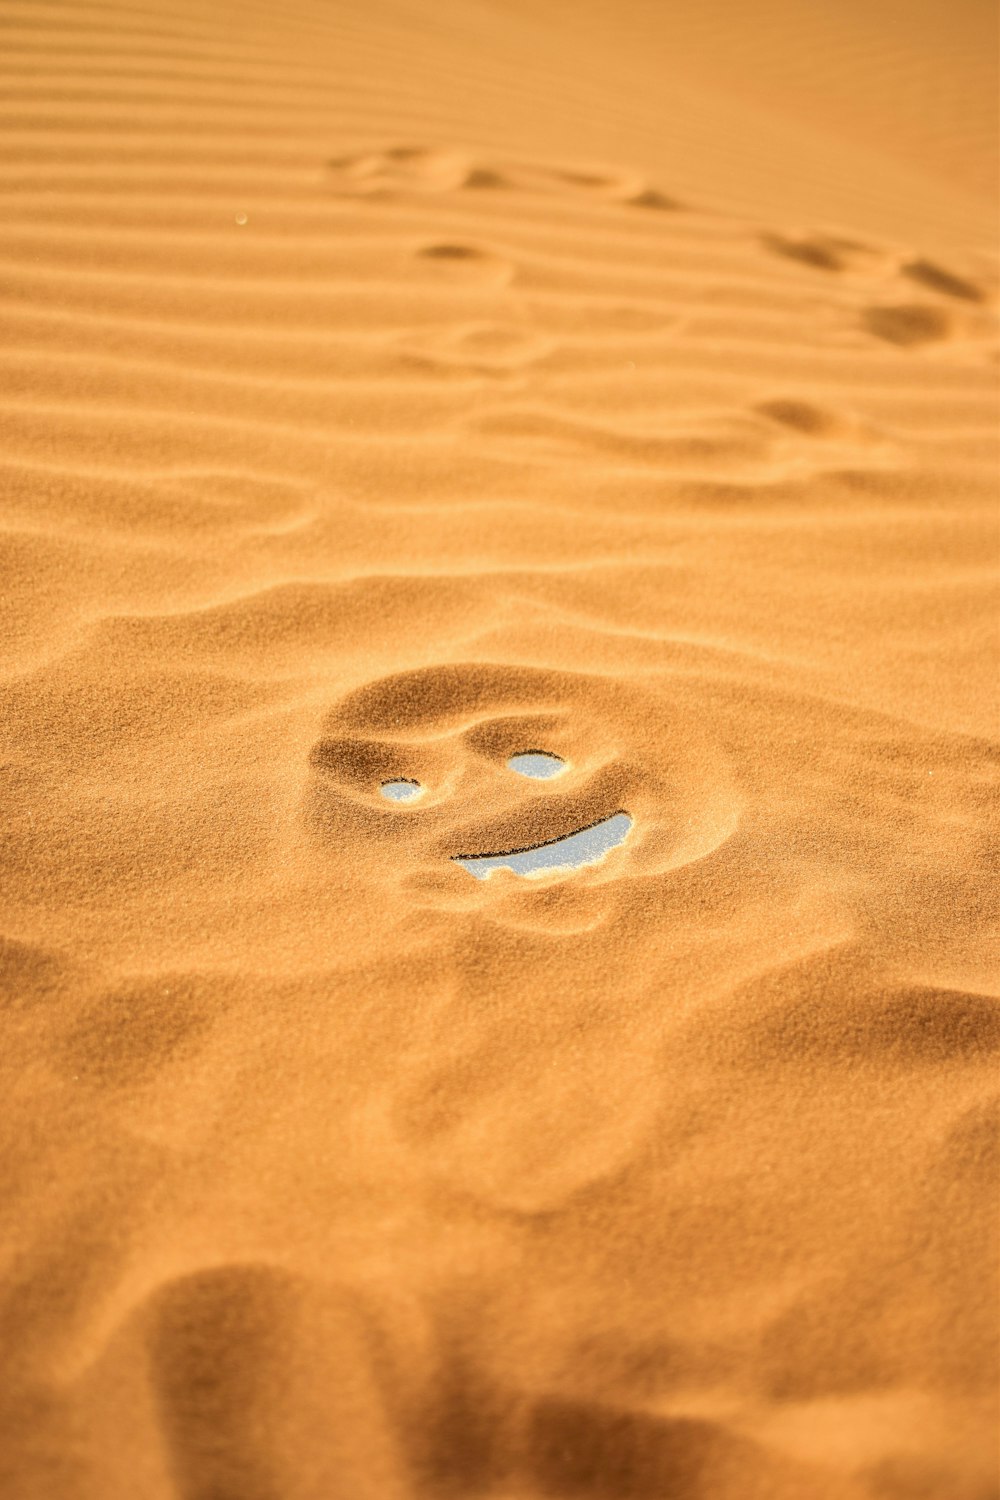 a smiley face drawn in the sand on a beach